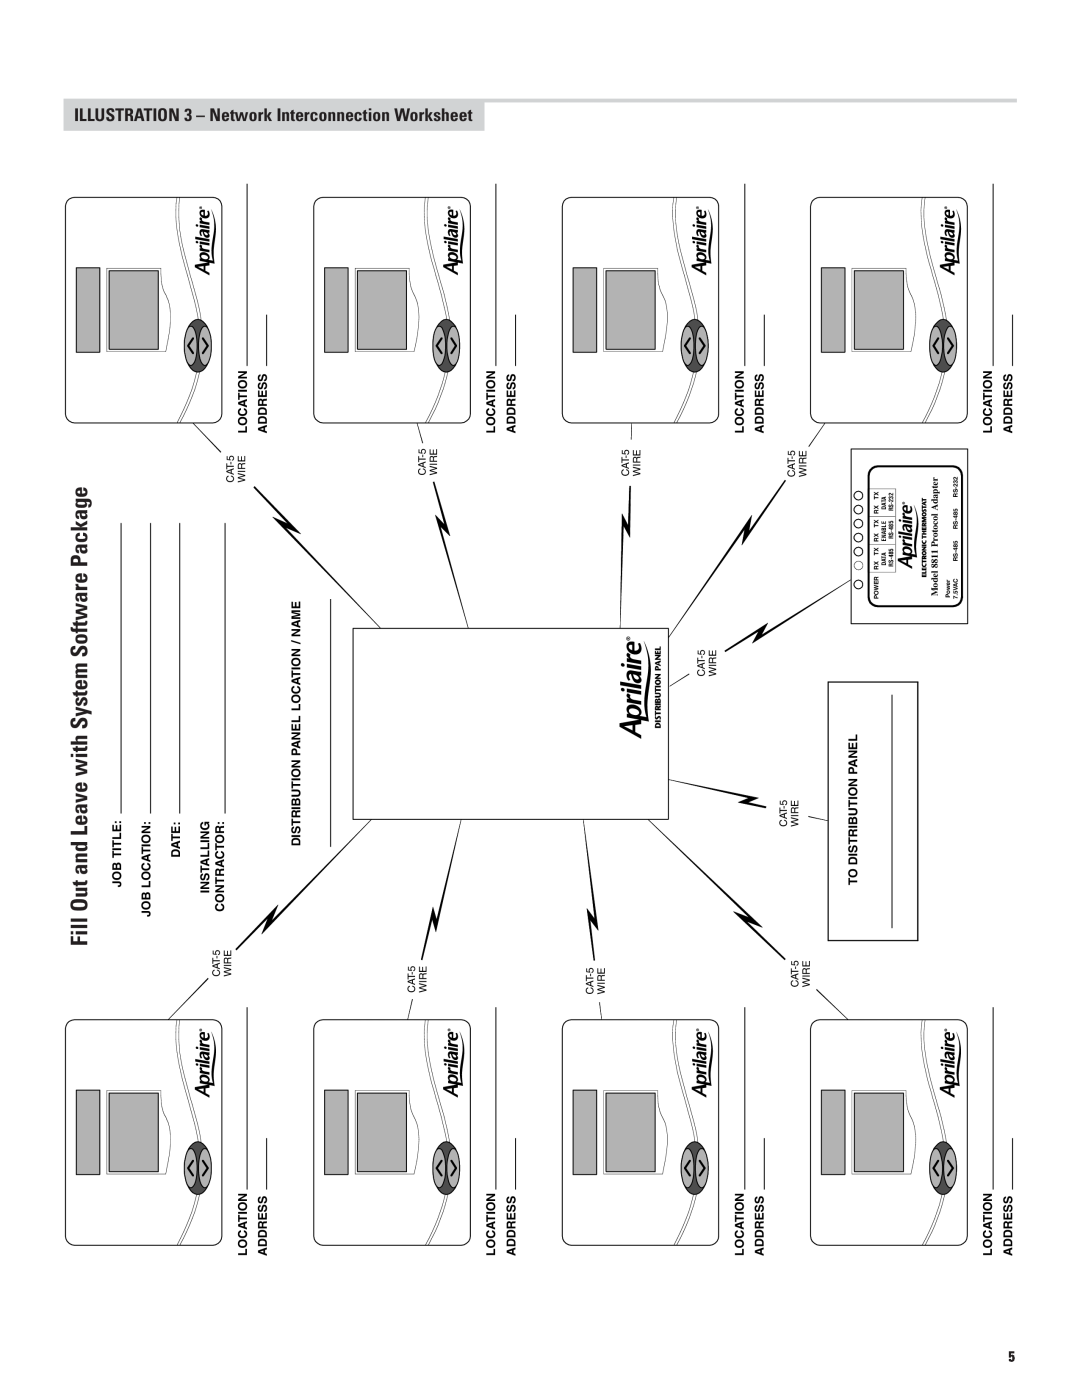 Echo 8870 Fill Out and Leave with System Software Package, ILLUSTRATION 3 - Network Interconnection Worksheet 